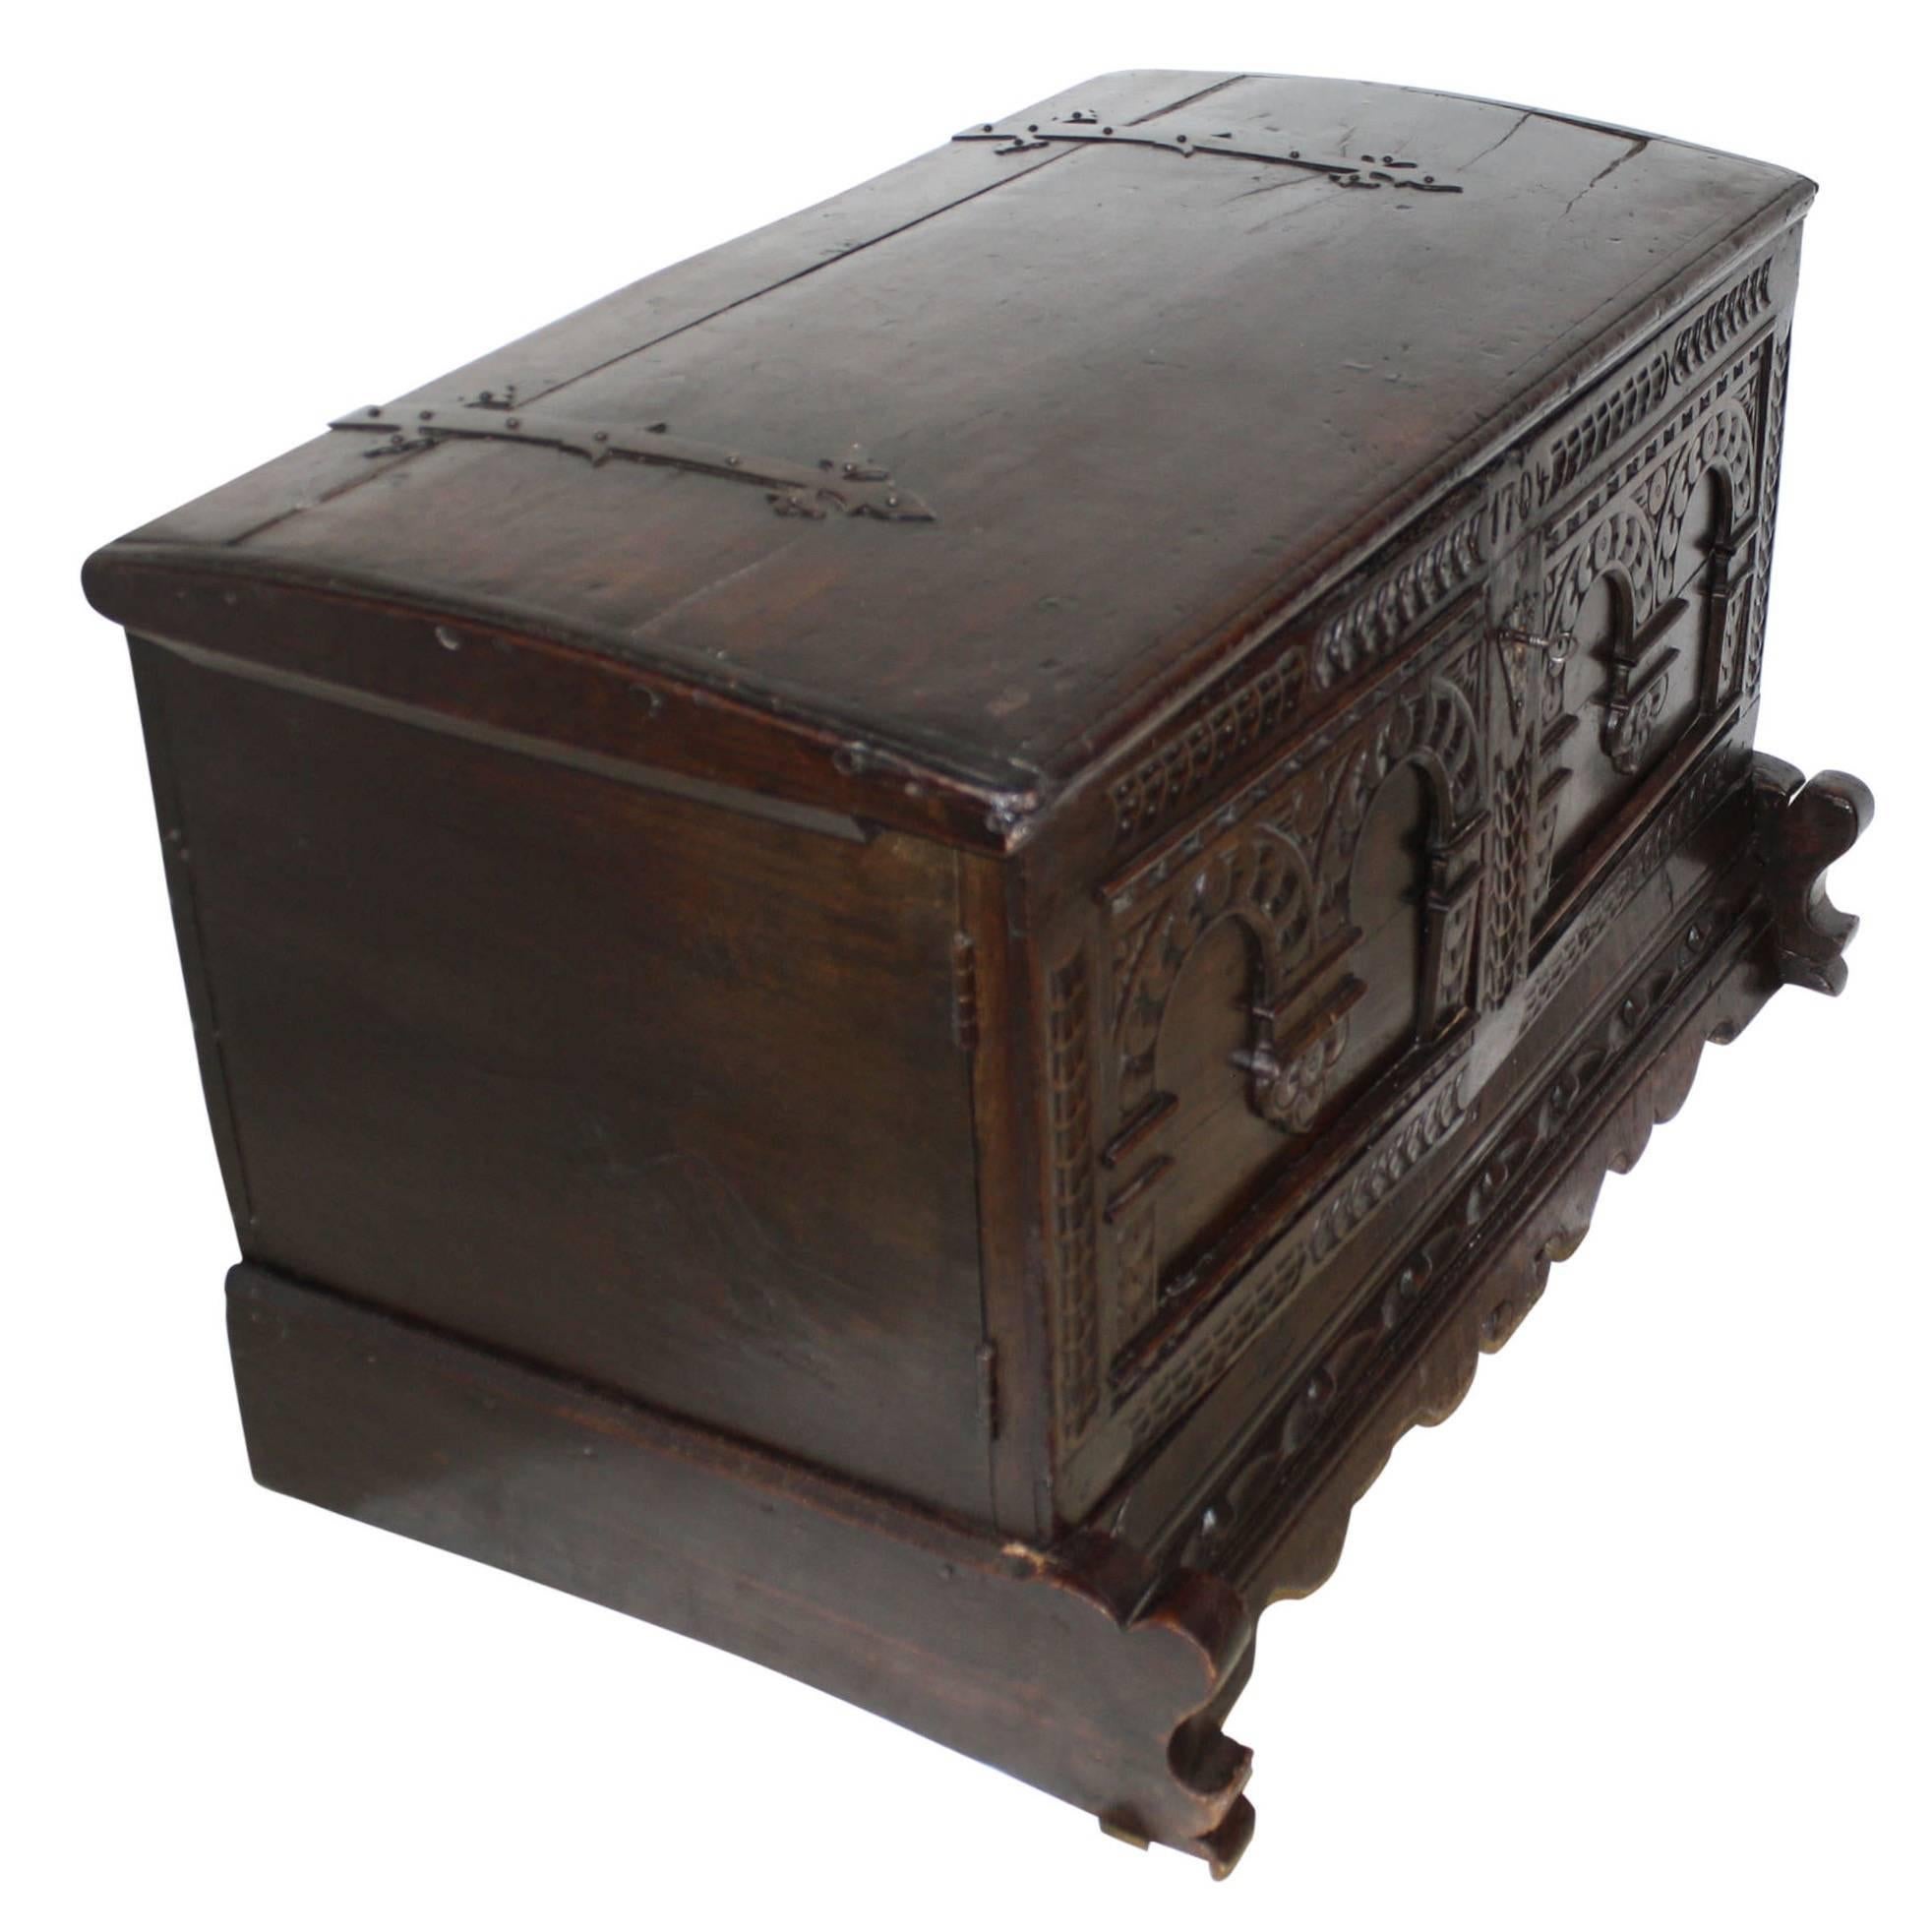 Northern Renaissance Early 19th Century Re-Purposed English Trunk For Sale